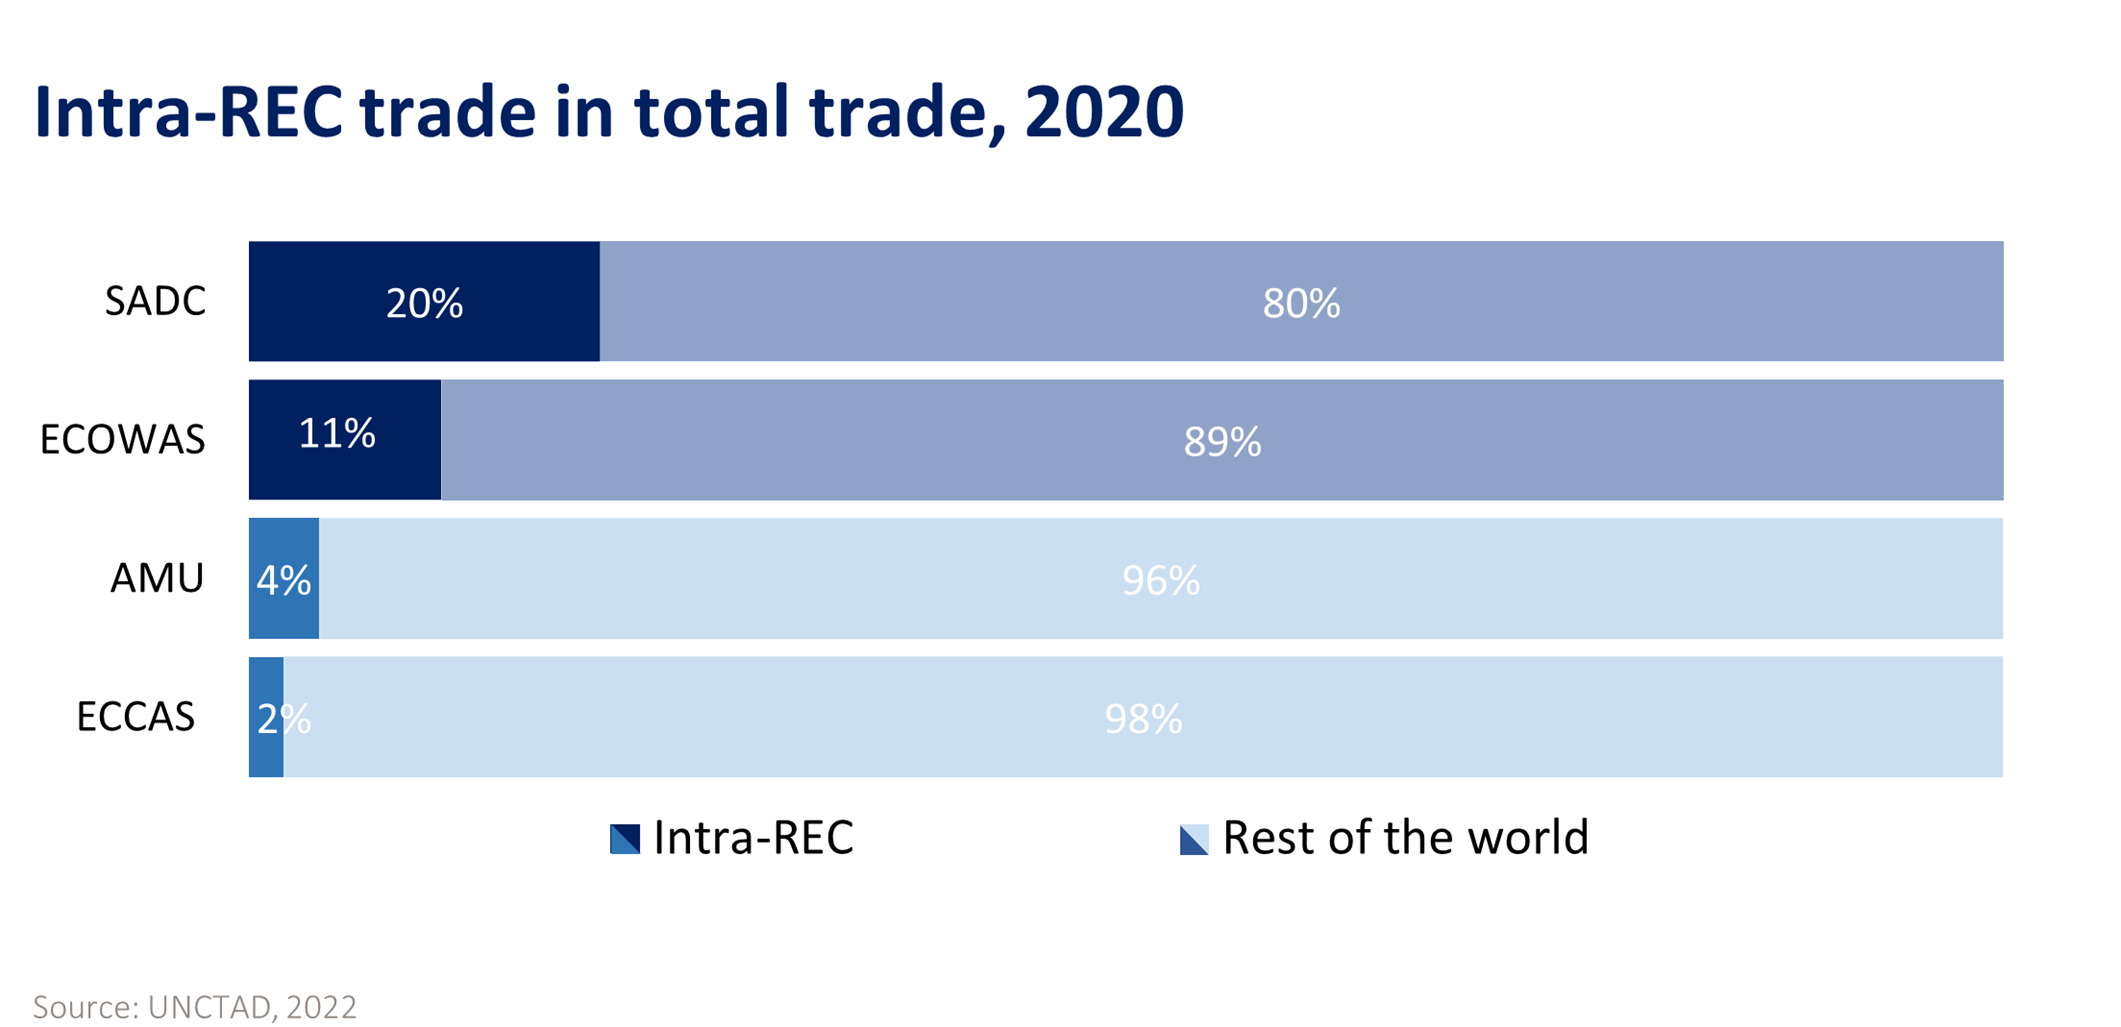 Intra-REC in total trade, 2020